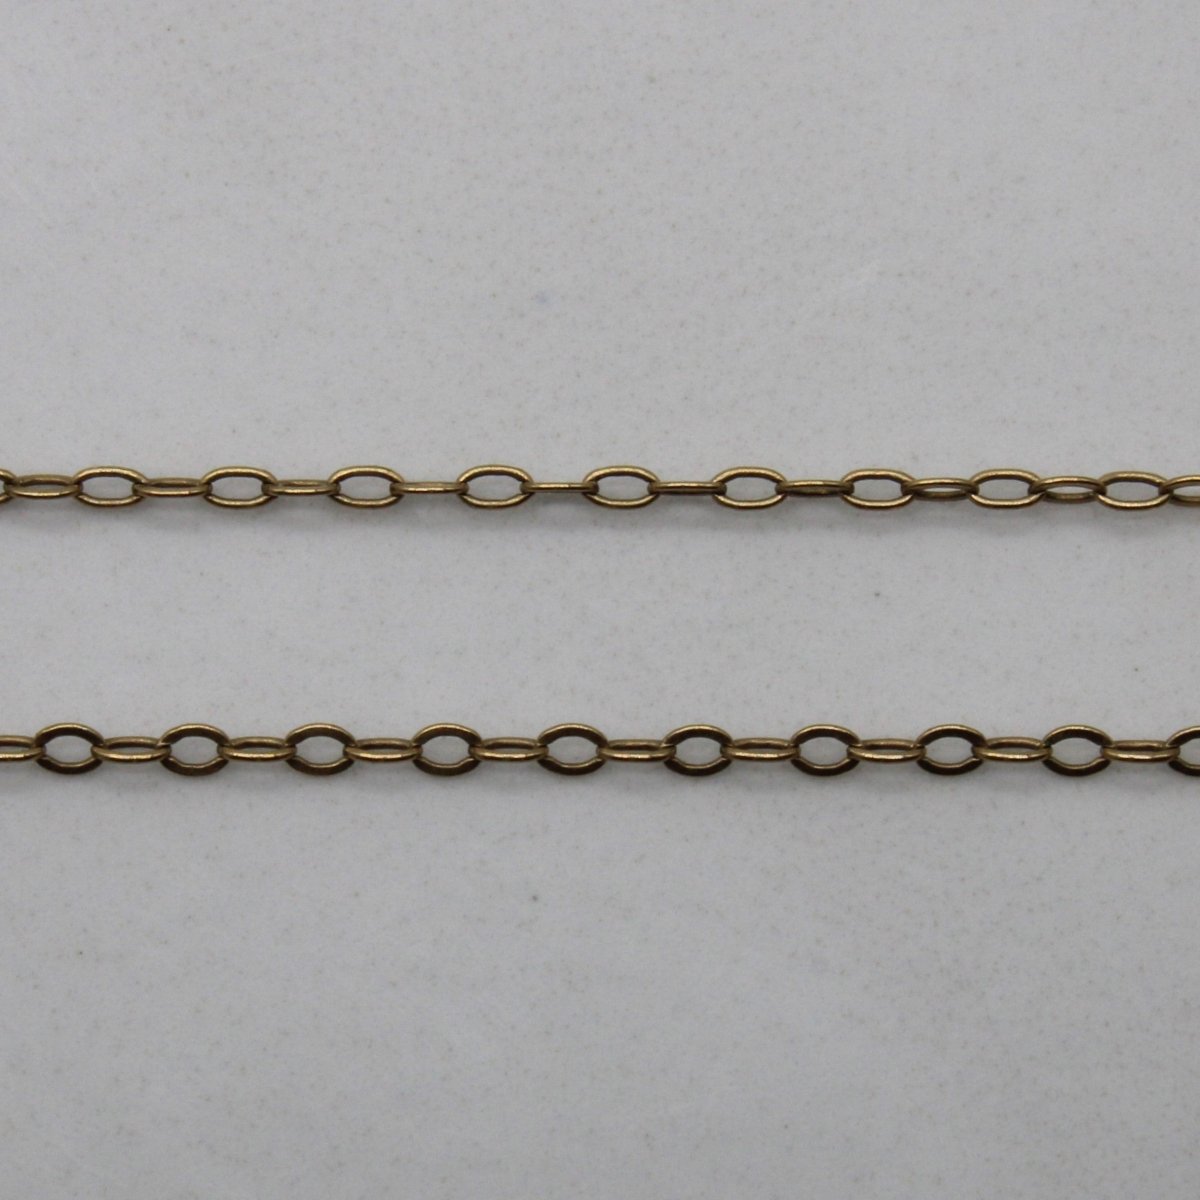 10k Yellow Gold Cable Chain | 21